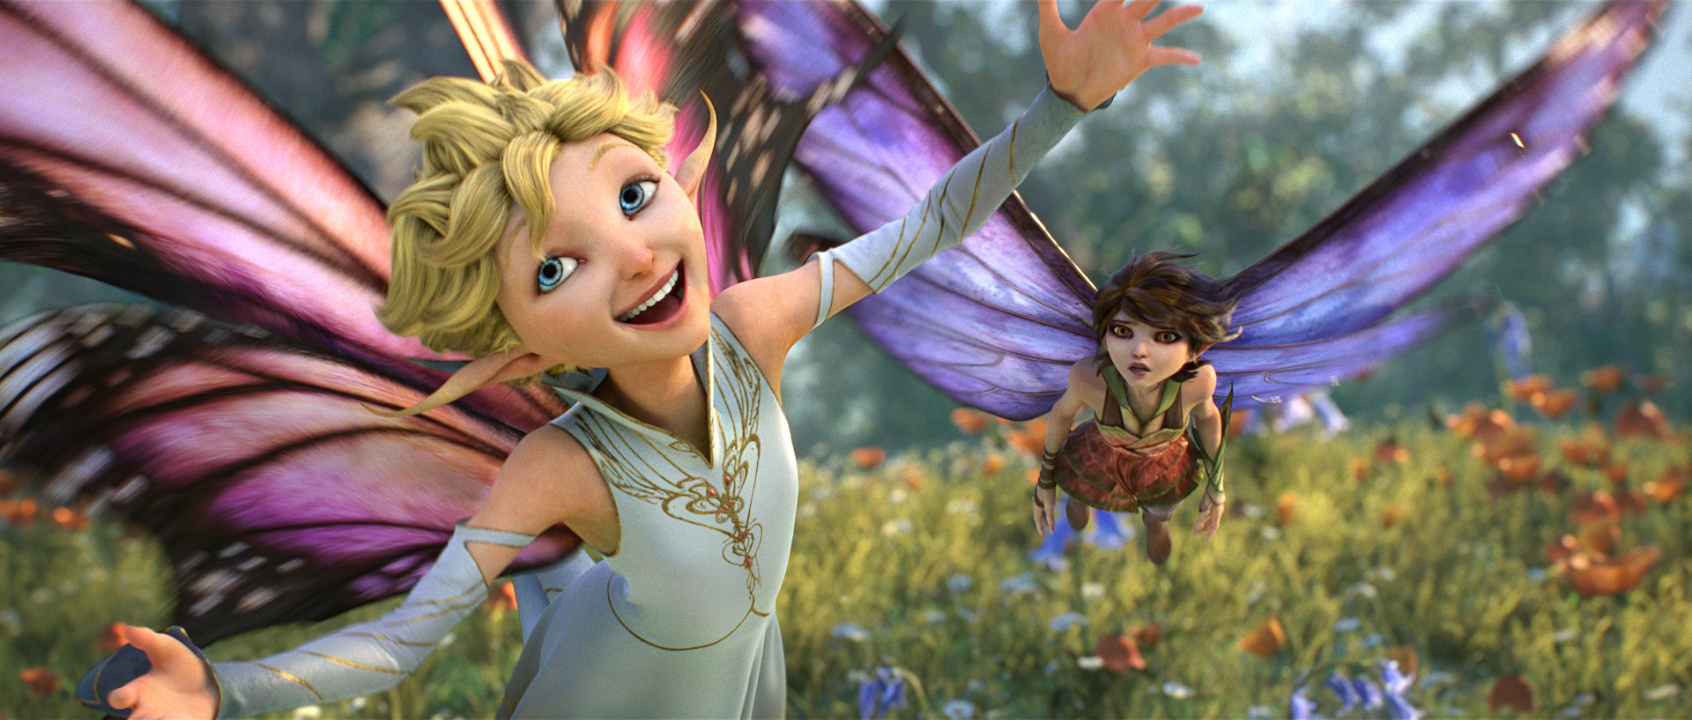 Check Out These Strange Magic DVD Bonus Feature Clips and Film Slideshow